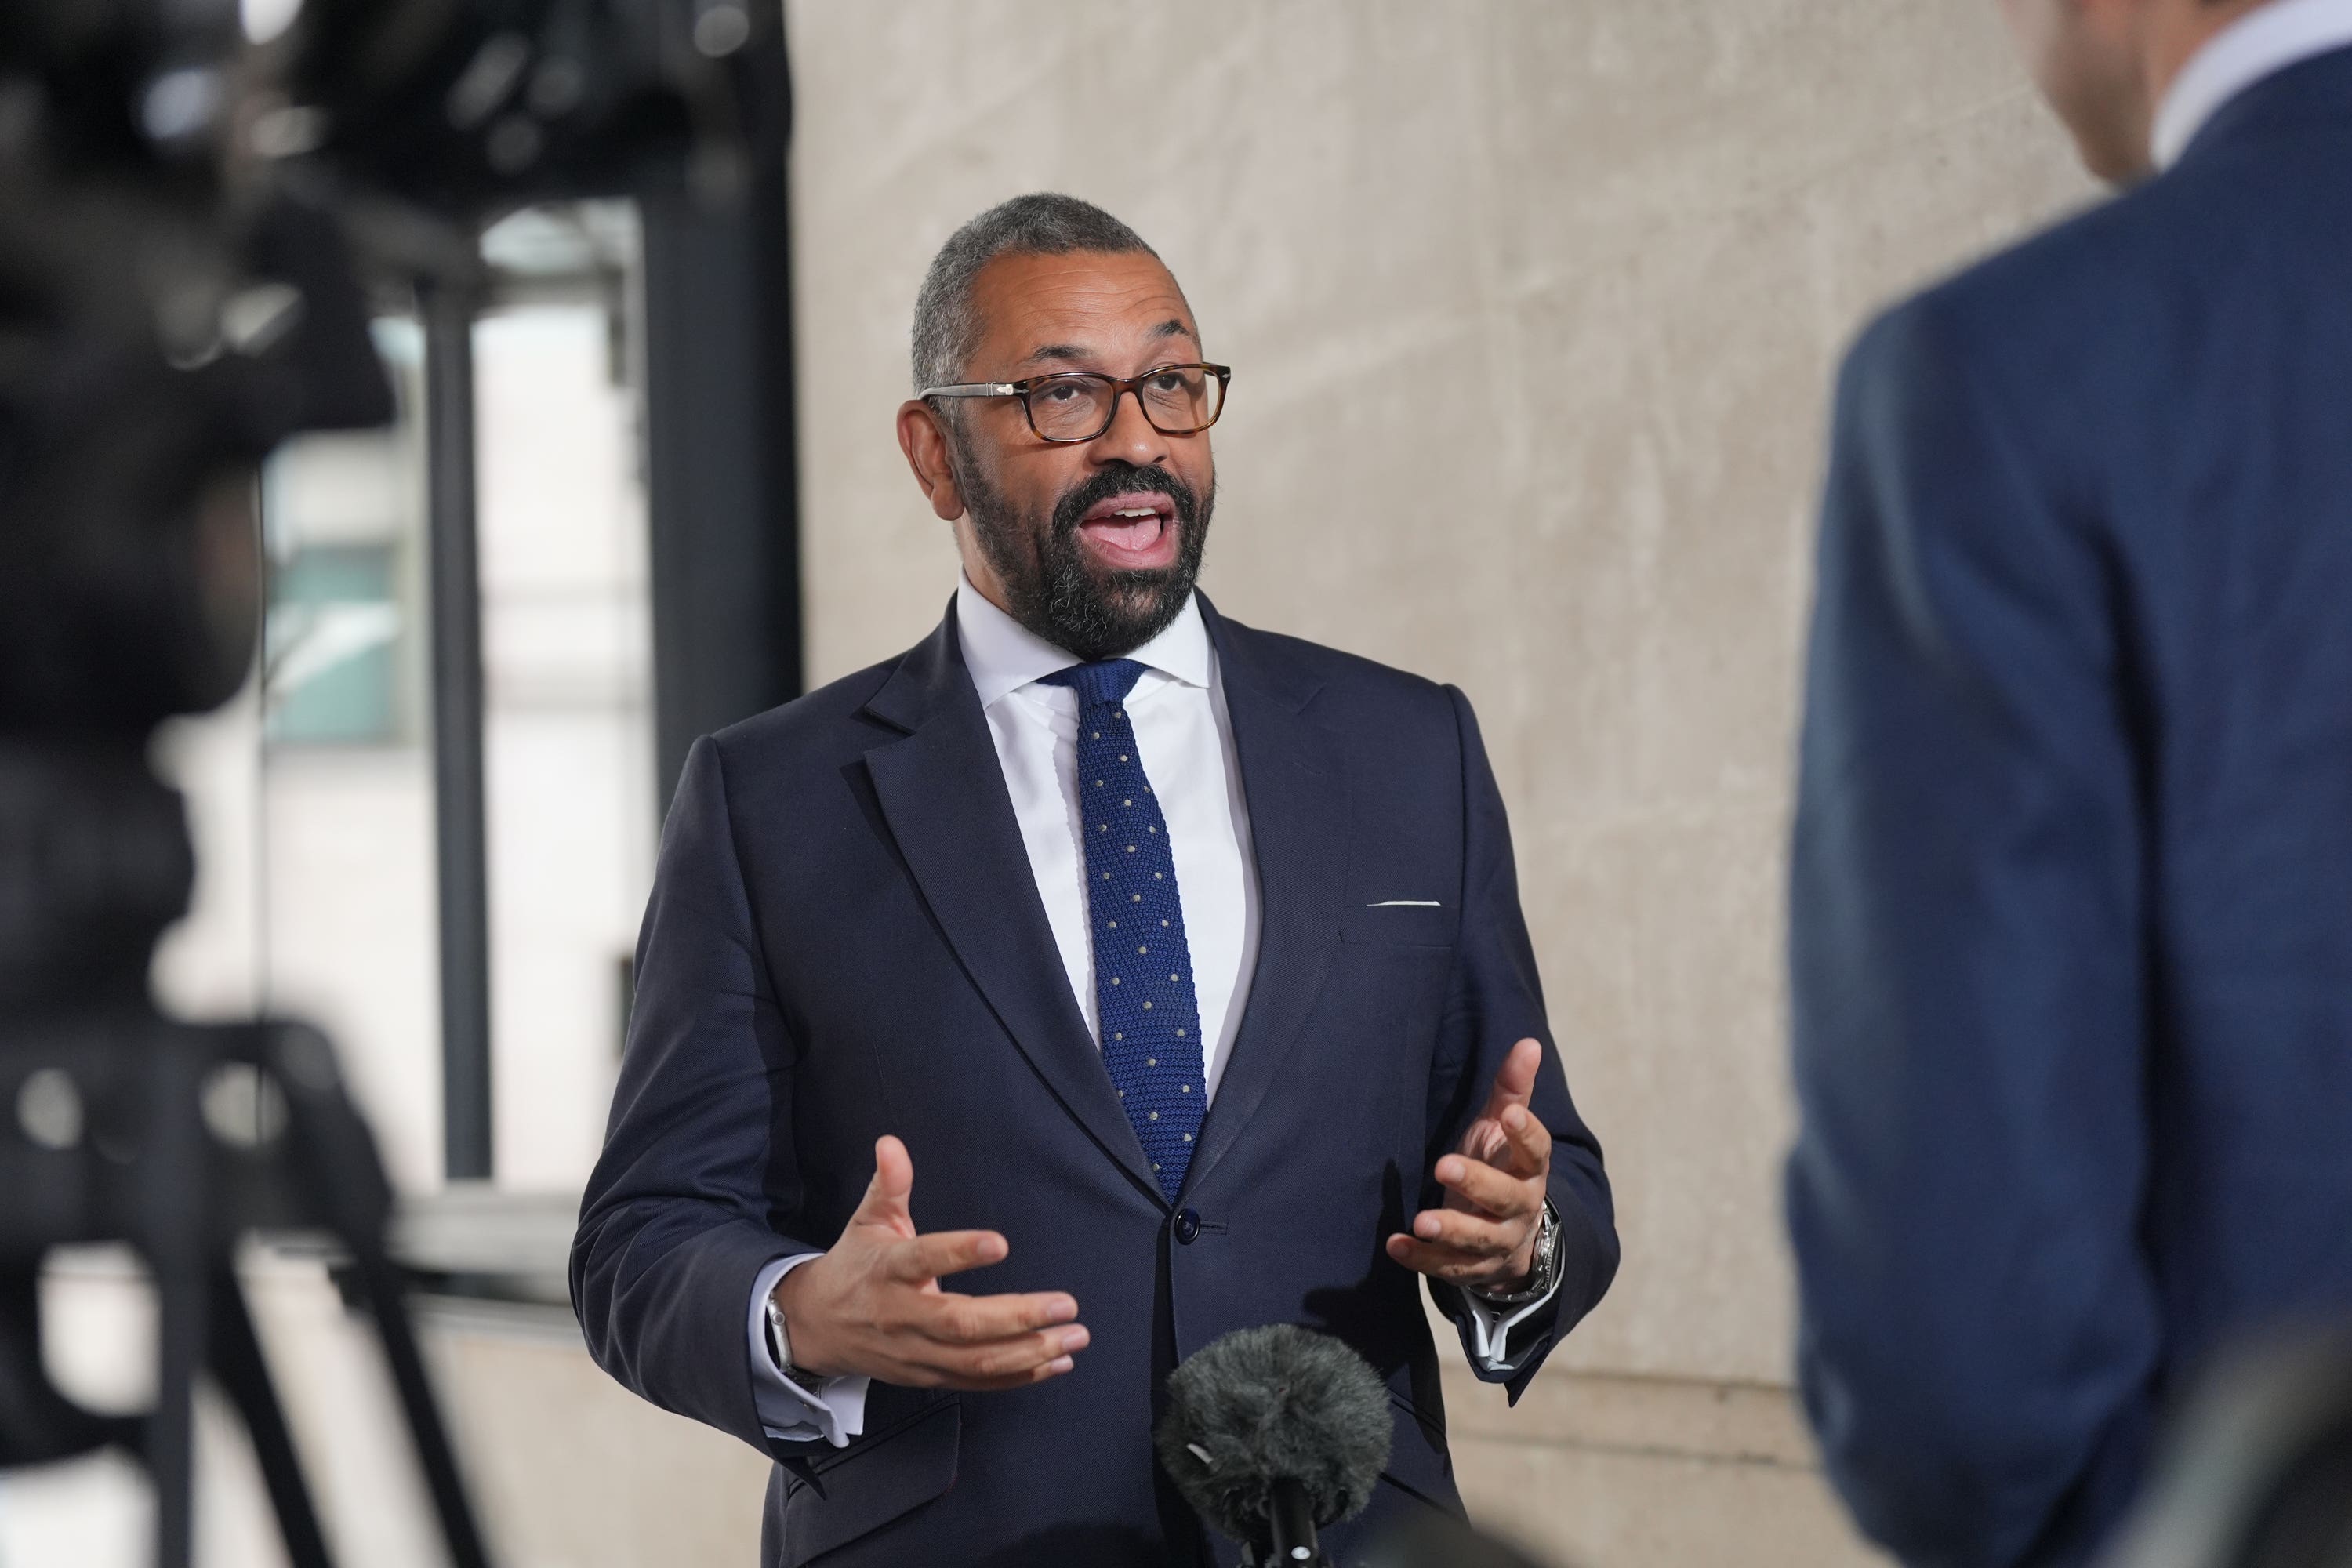 Home secretary James Cleverly stressed teenagers would not be sent to jail for refusing to participate